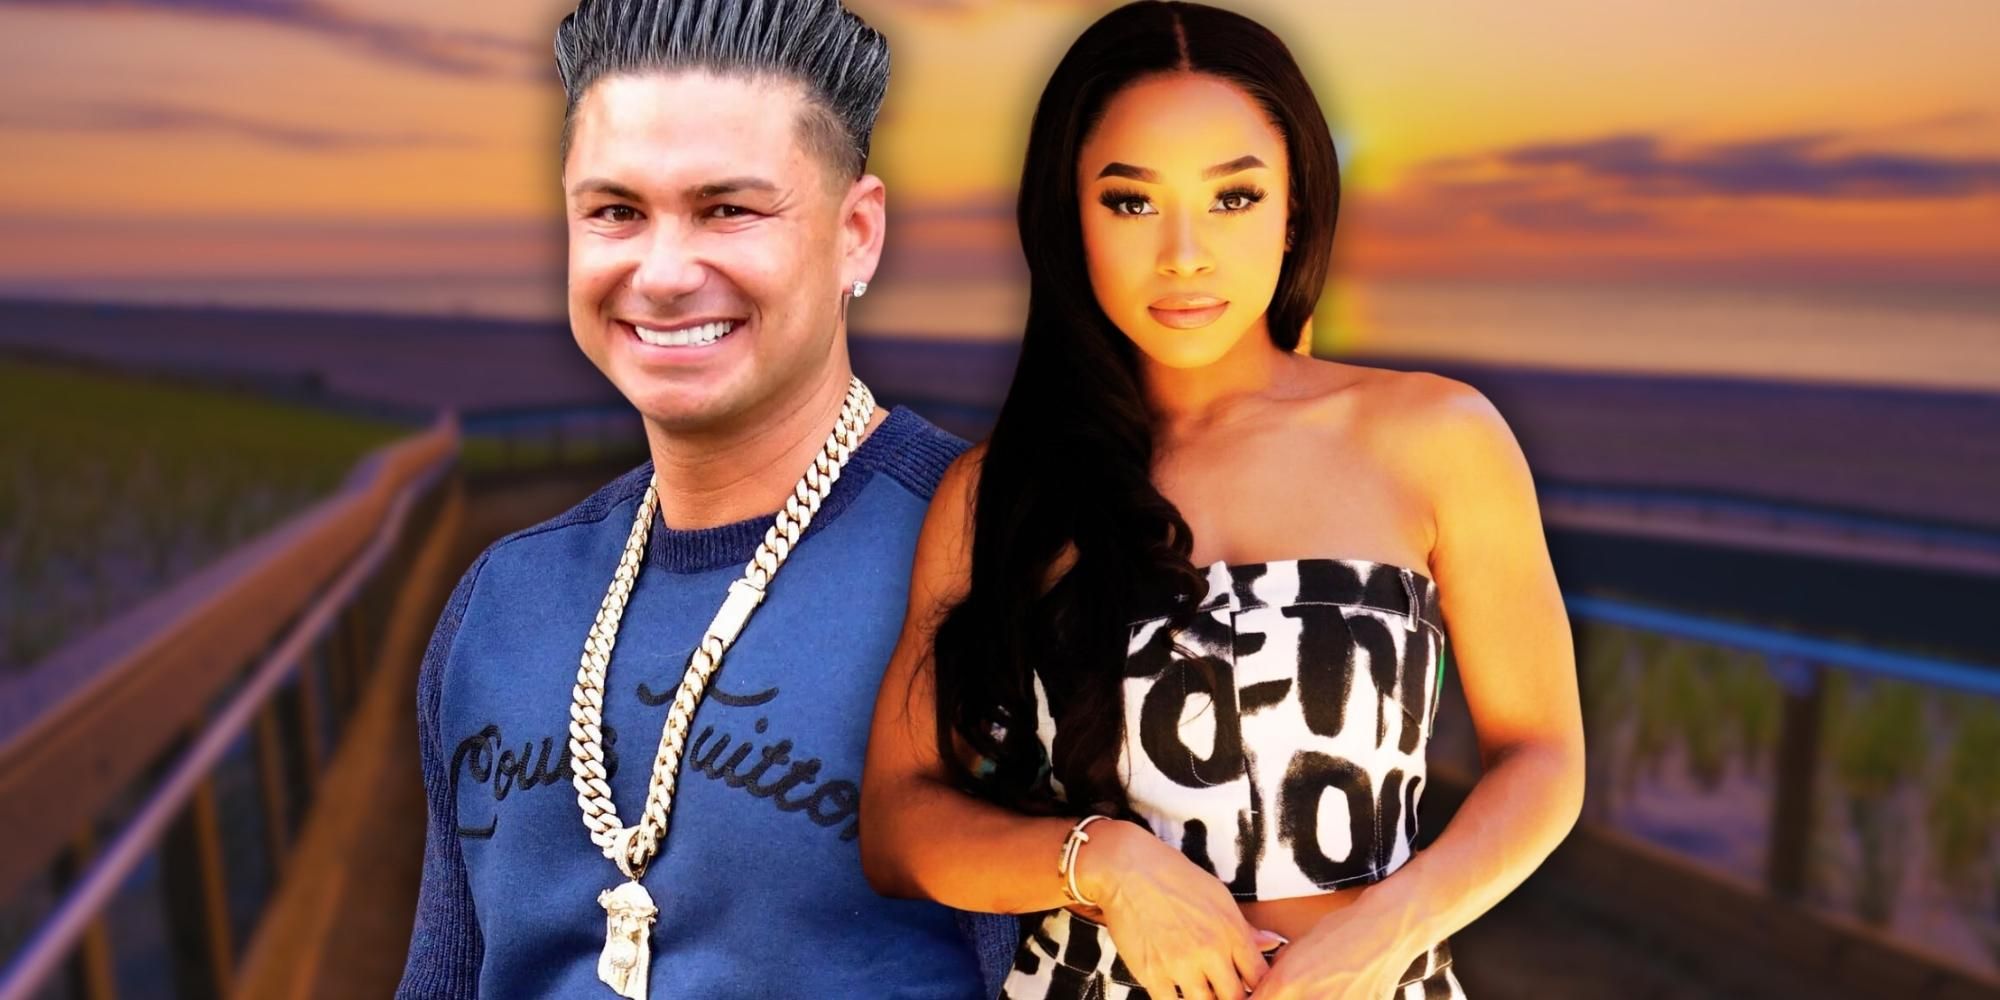 Jersey Shore: Are Nikki Hall & Pauly D Still Together?